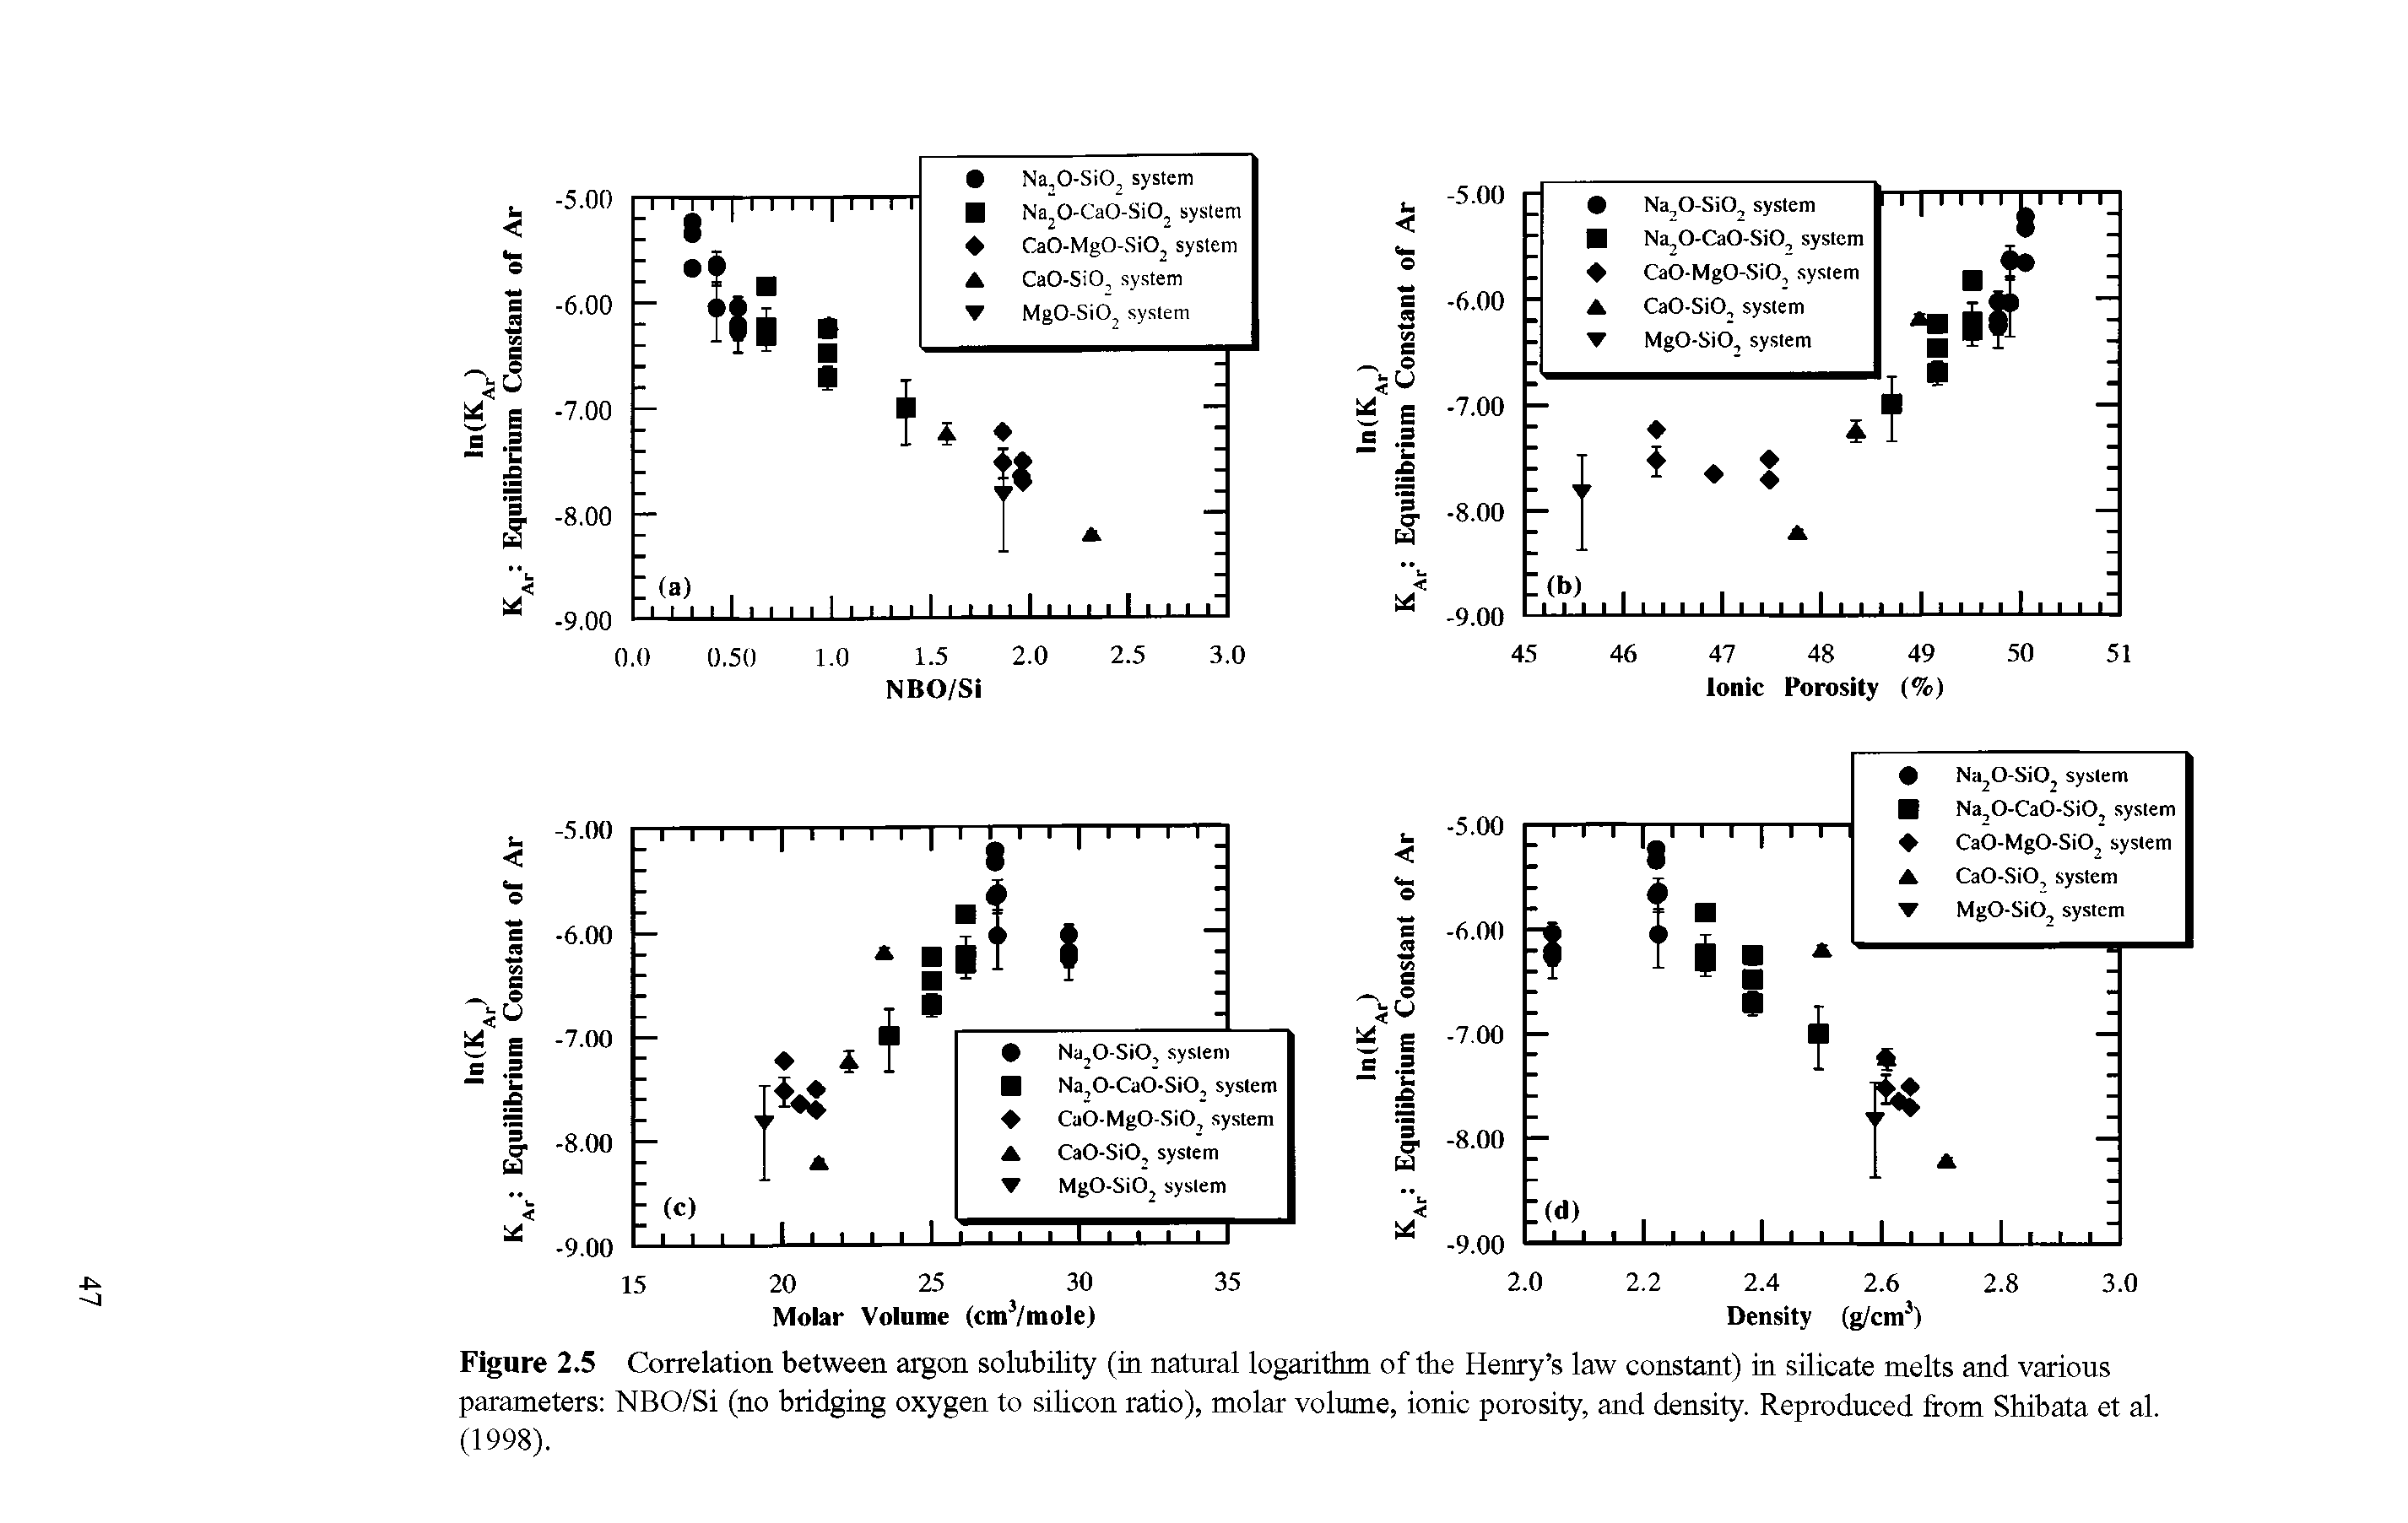 Figure 2.5 Correlation between argon solubility (in natural logarithm of the Henry s law constant) in silicate melts and various parameters NBO/Si (no bridging oxygen to silicon ratio), molar volume, ionic porosity, and density. Reproduced from Shibata et al. (1998).